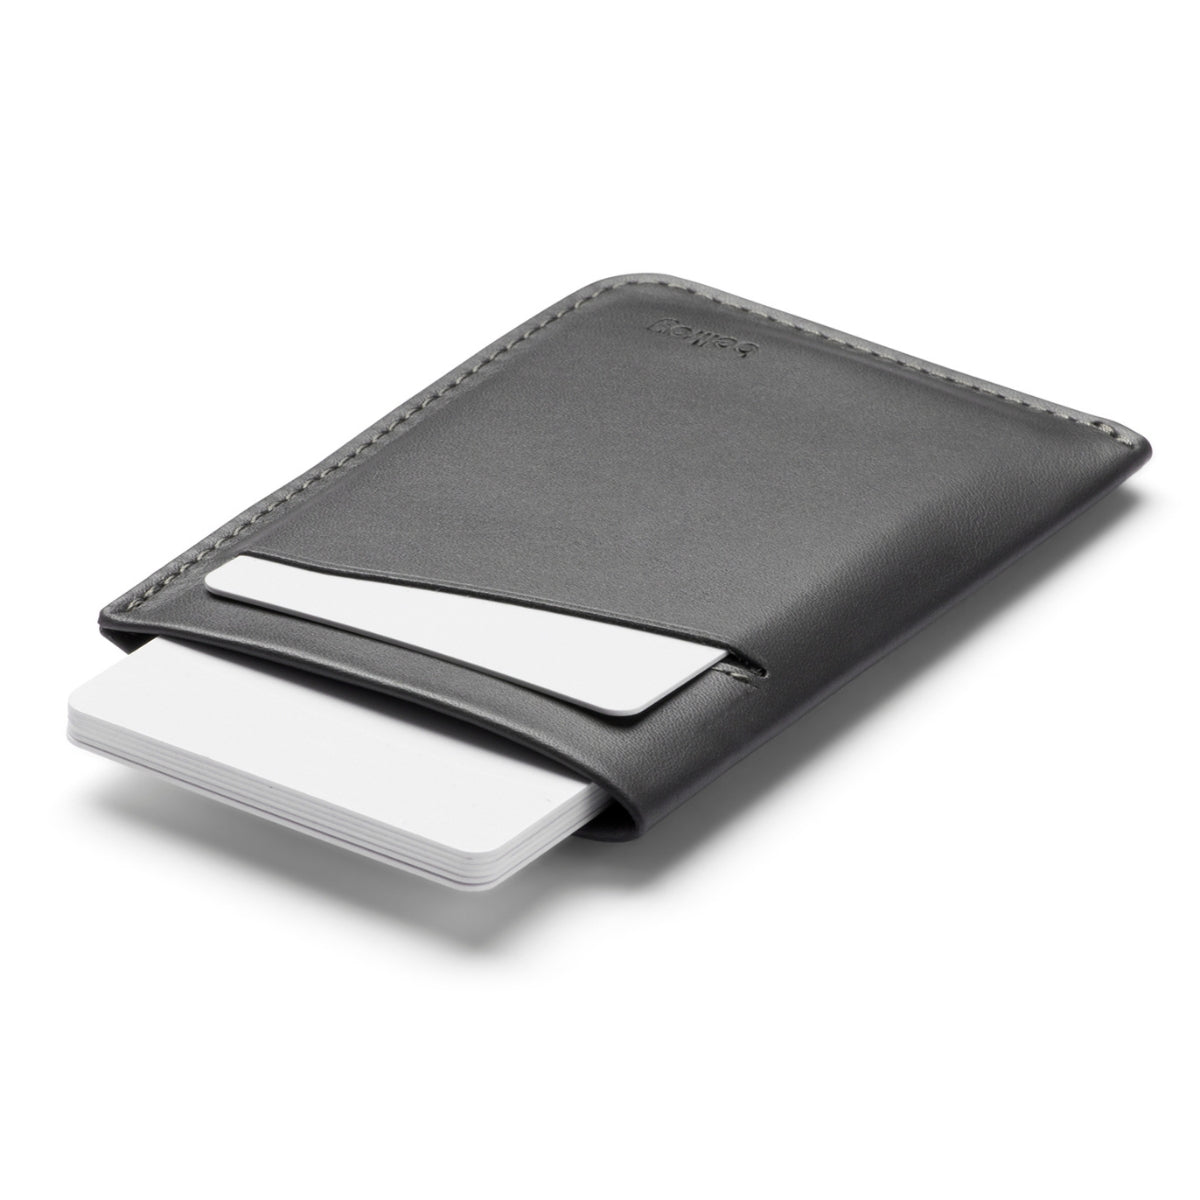 Bellroy Card Sleeve (Second Edition) in Charcoal Cobalt